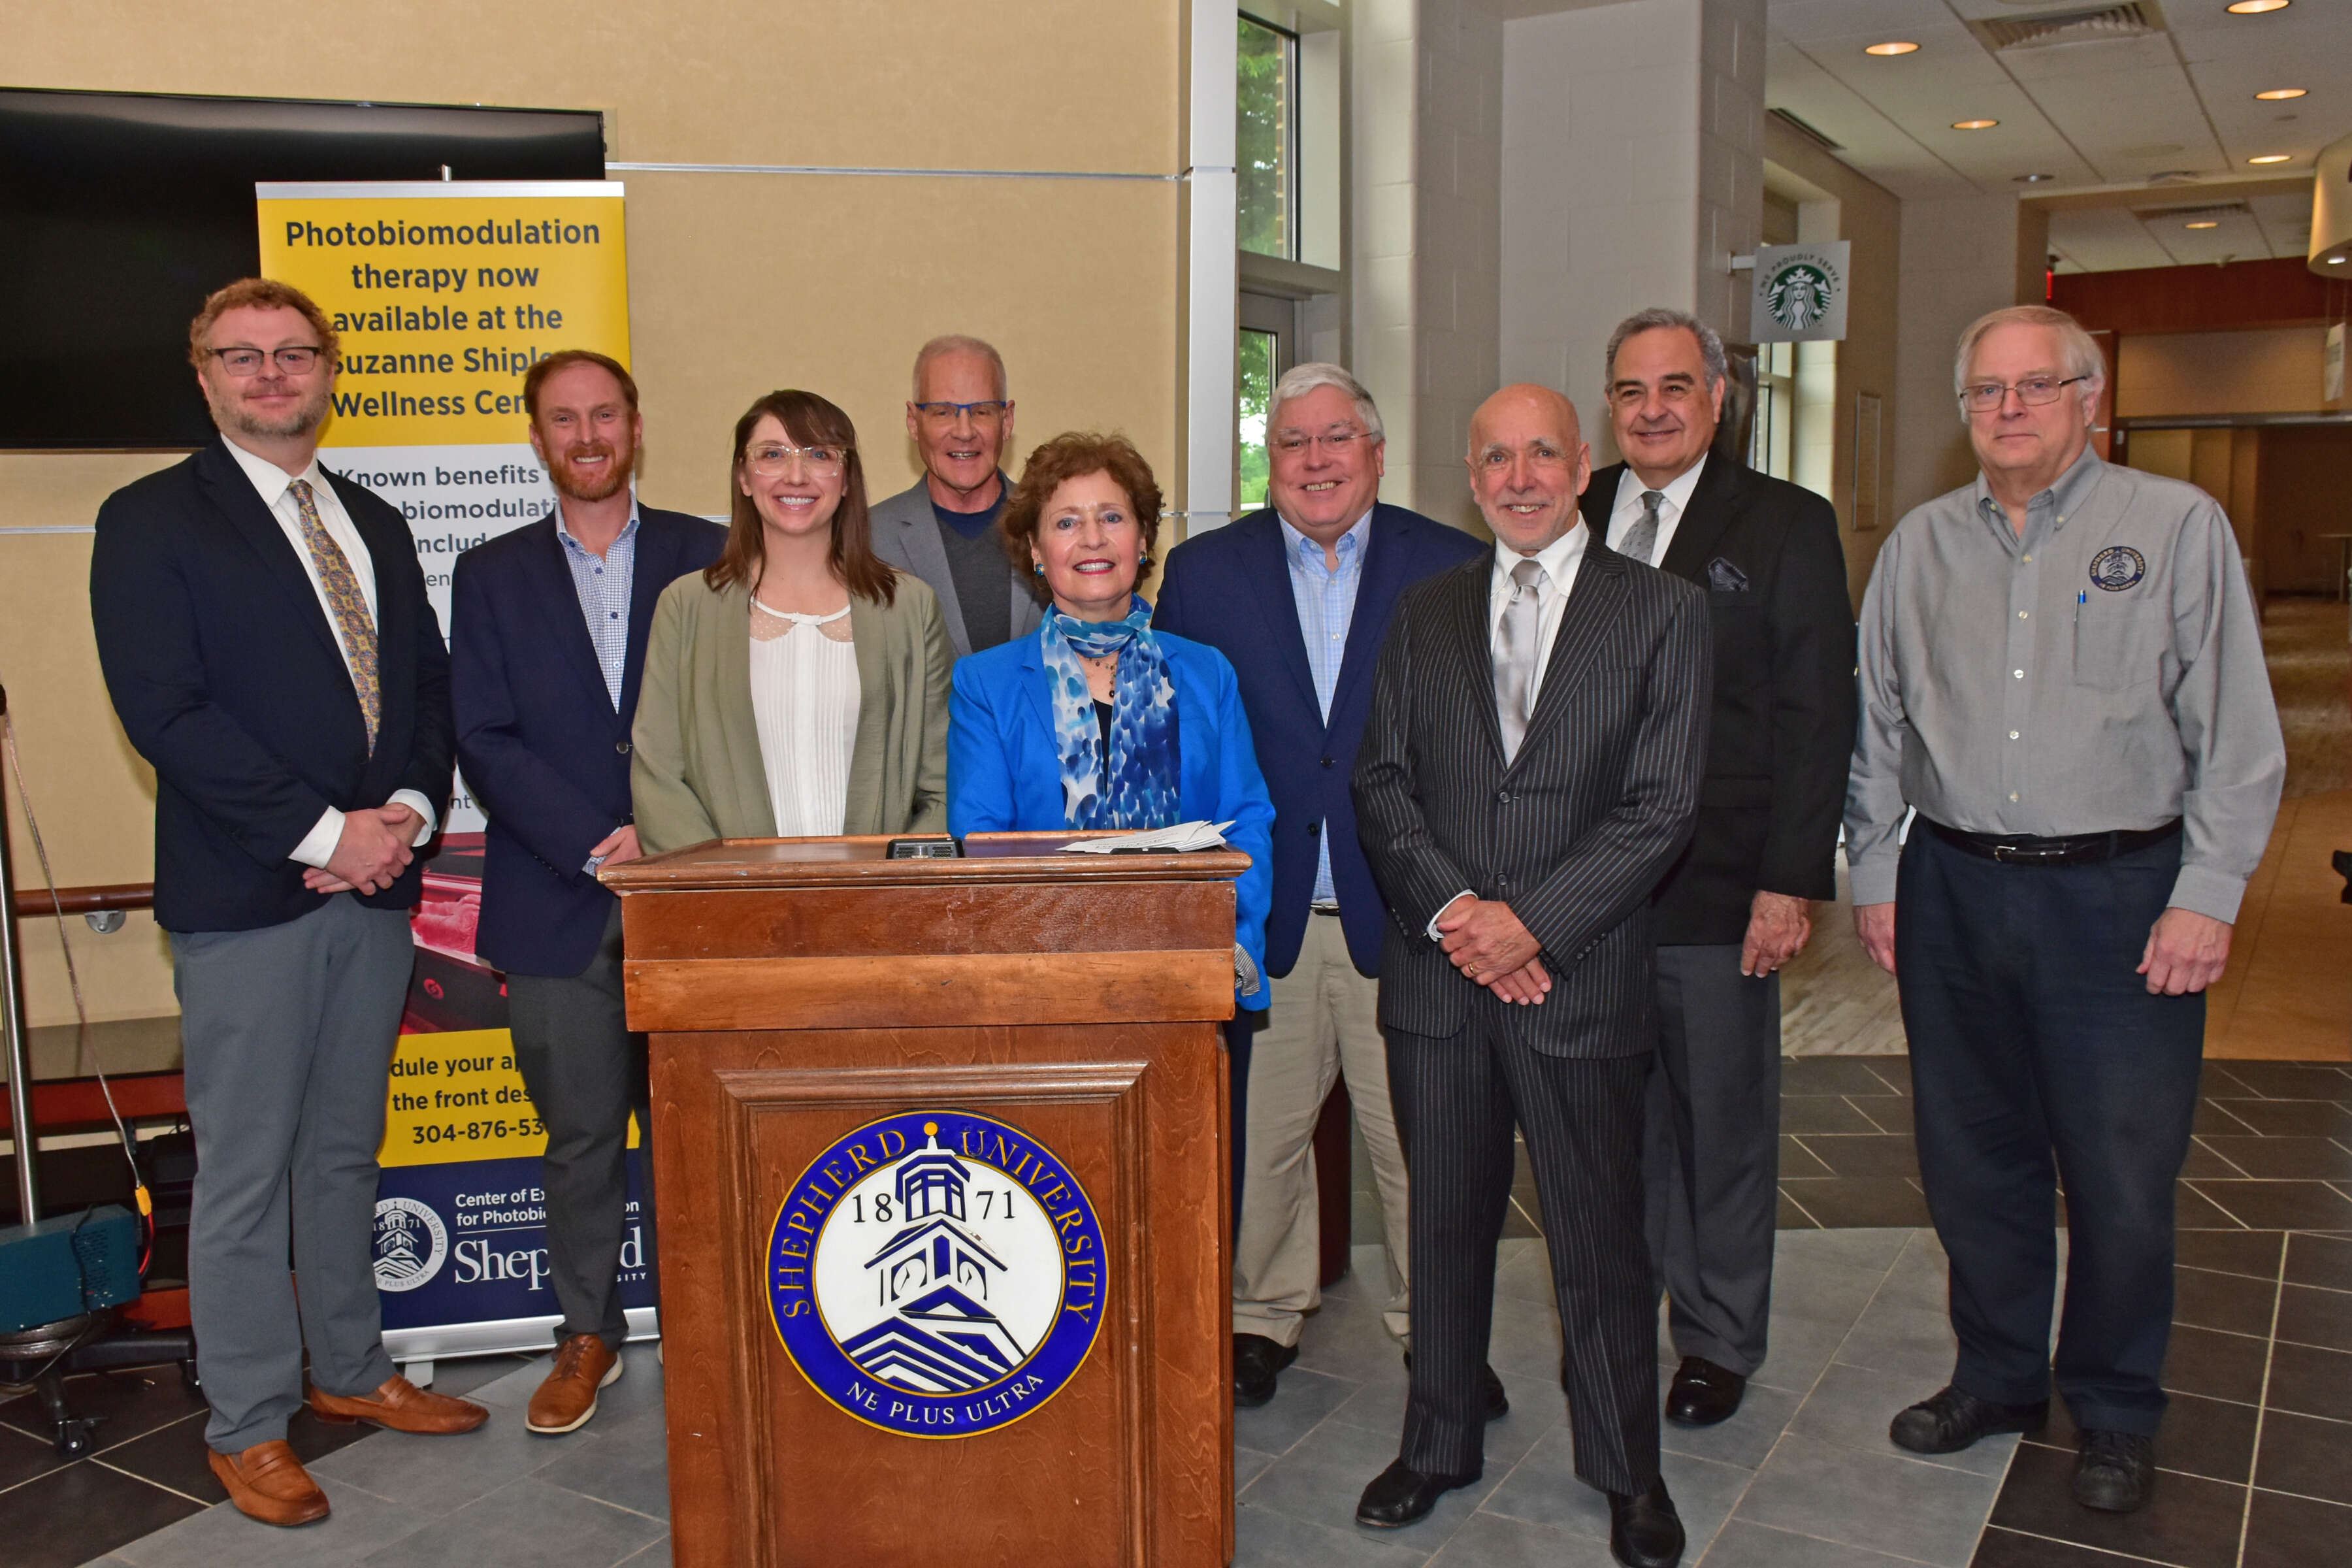 Pictured (l. to r.) are Matt Harvey, Jefferson County Prosecuting Attorney; John “JB” McCuskey, West Virginia auditor; Dr. Jennifer Flora, Suzanne Shipley Wellness Center director; Dr. Robert Bowen, PBM Foundation Board of Directors member; Dr. Mary J.C. Hendrix, Shepherd president; Patrick Morrisey, West Virginia attorney general; Dr. Donald Patthoff, PBM Foundation Board of Directors member; the Honorable Scot Faulkner, PBM Foundation Administrative Steering Committee member; and Dr. Ben Martz, dean, Shepherd’s College of Business, Recreation, and Education.